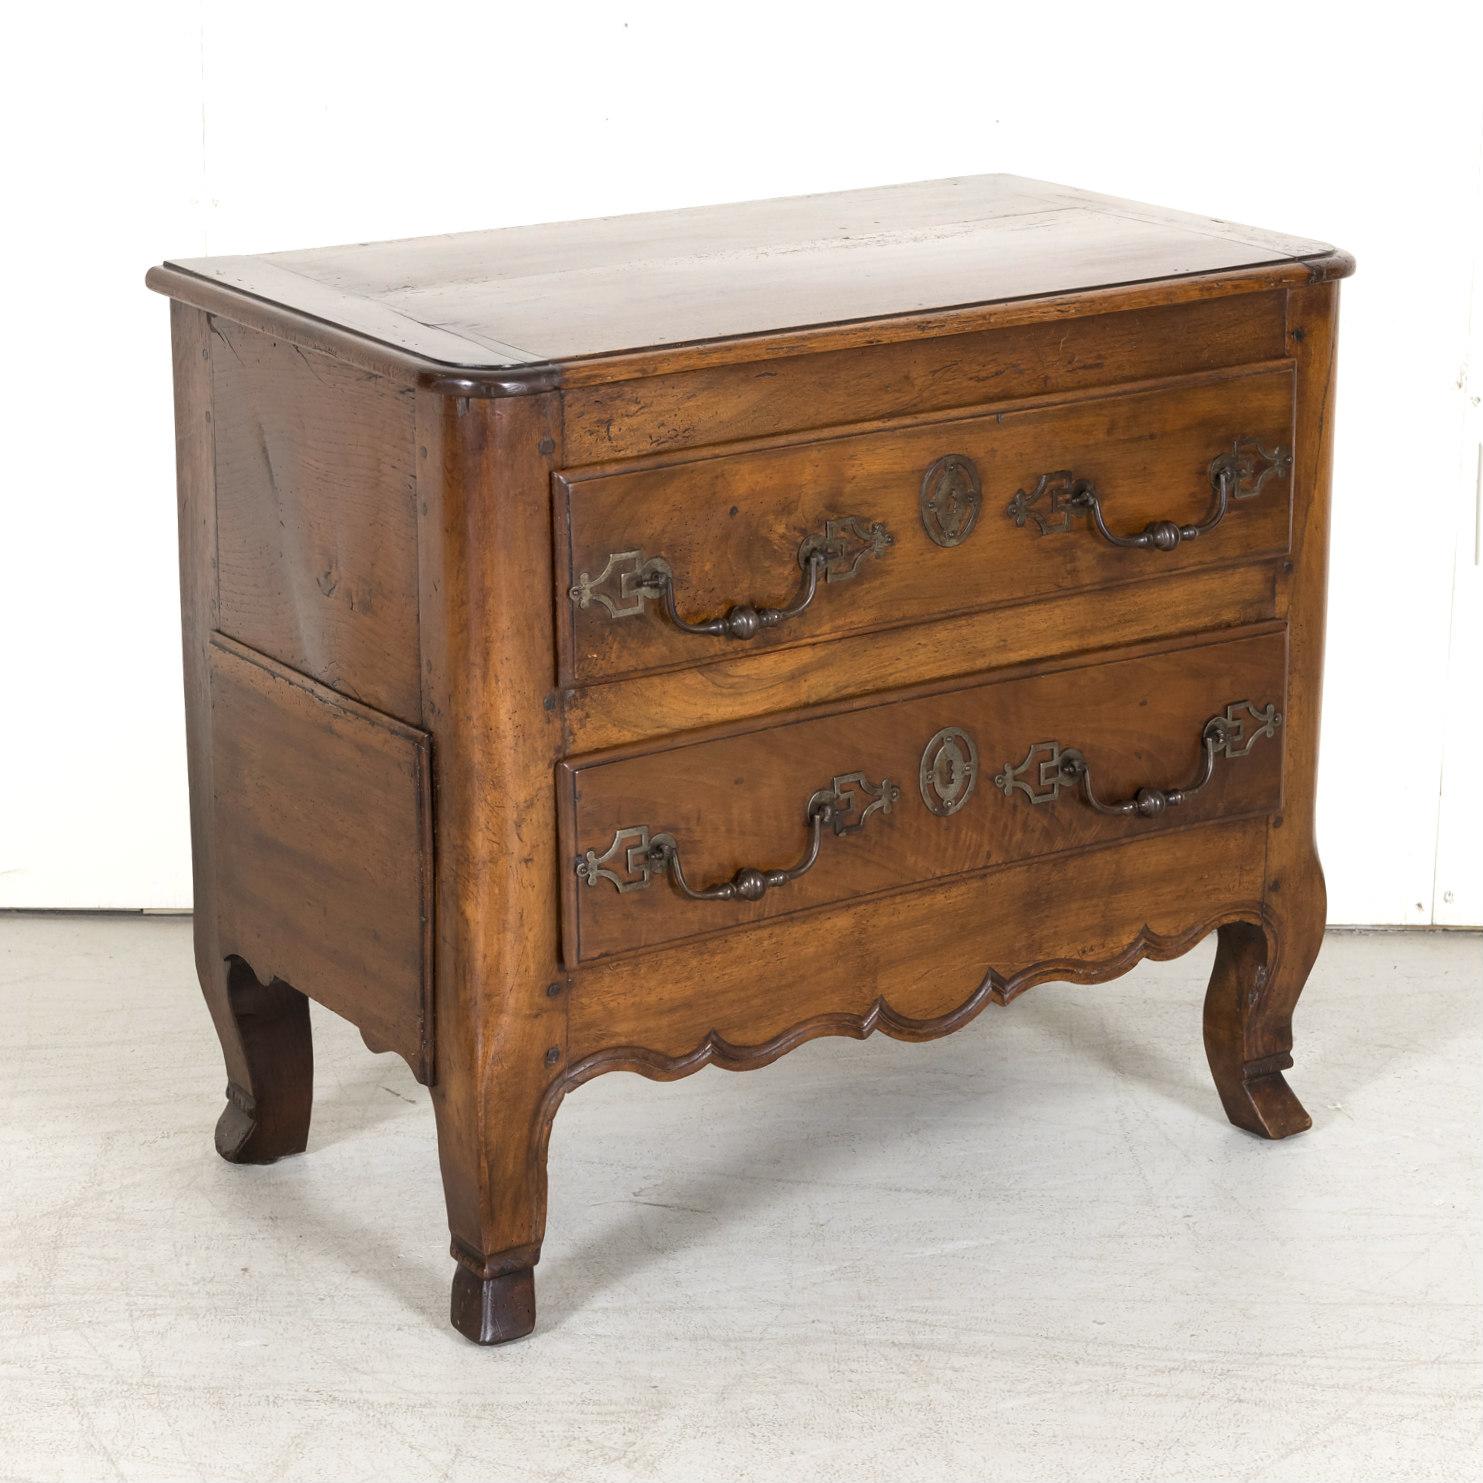 French Mid-18th Century Louis XV Period Petite Walnut Commode